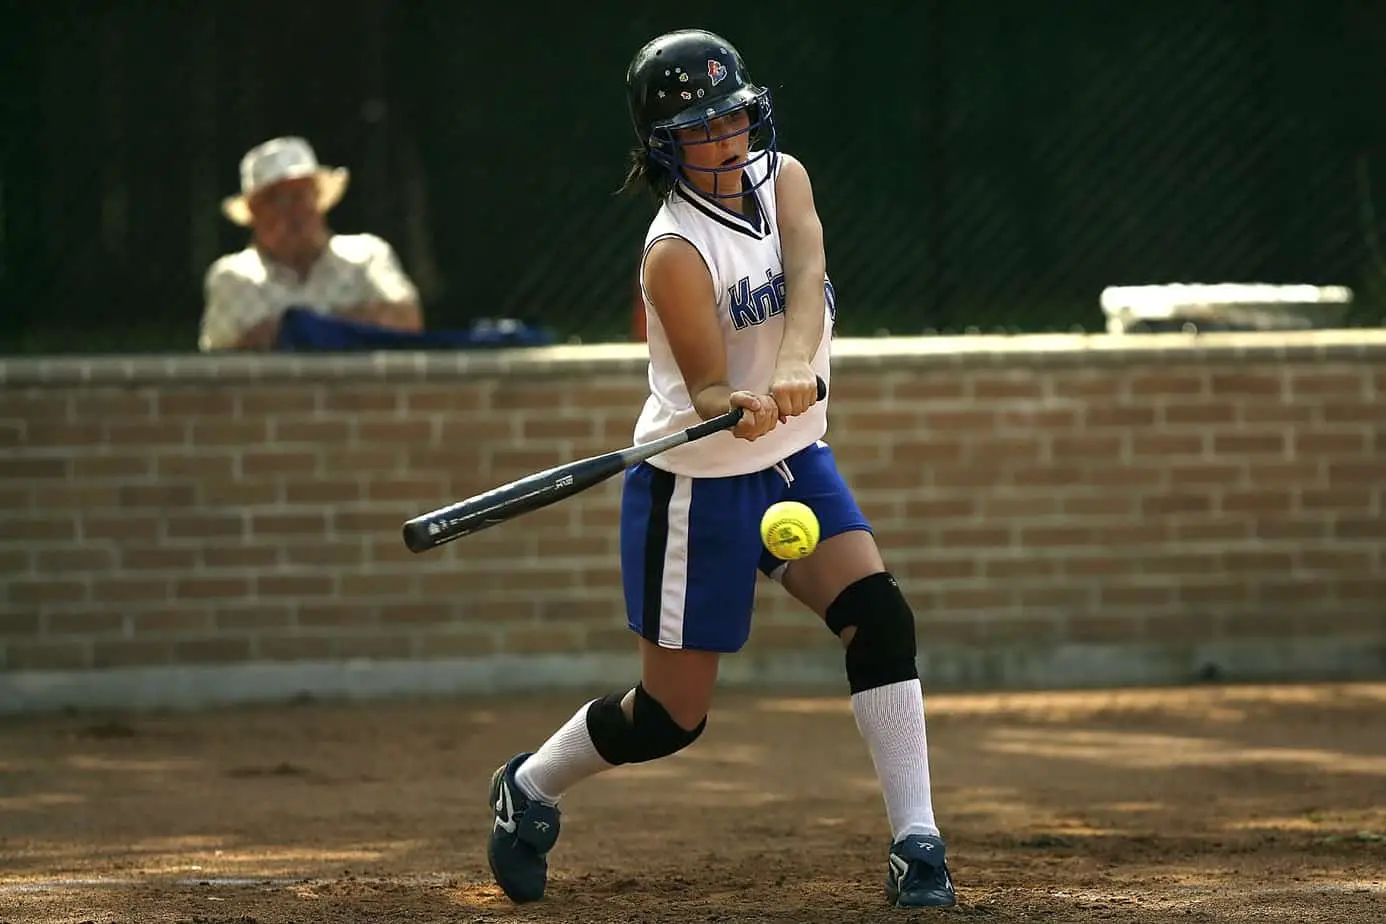 Why Softball Pitch Underhand? Two Reasons for Underhand Pitching